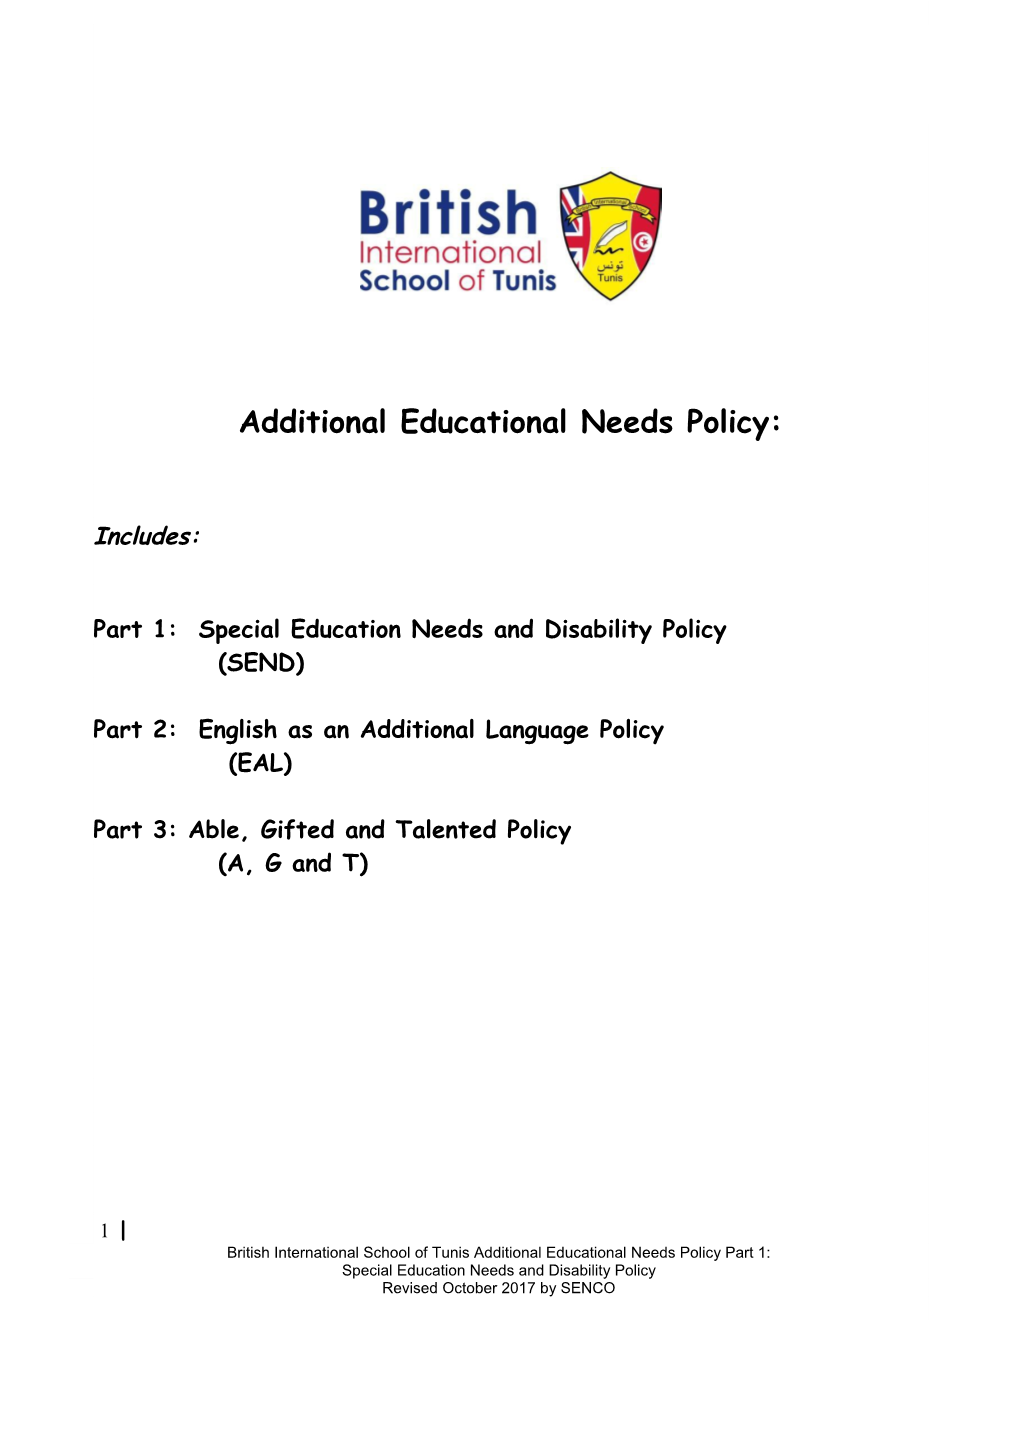 Part 1: Special Education Needs and Disability Policy